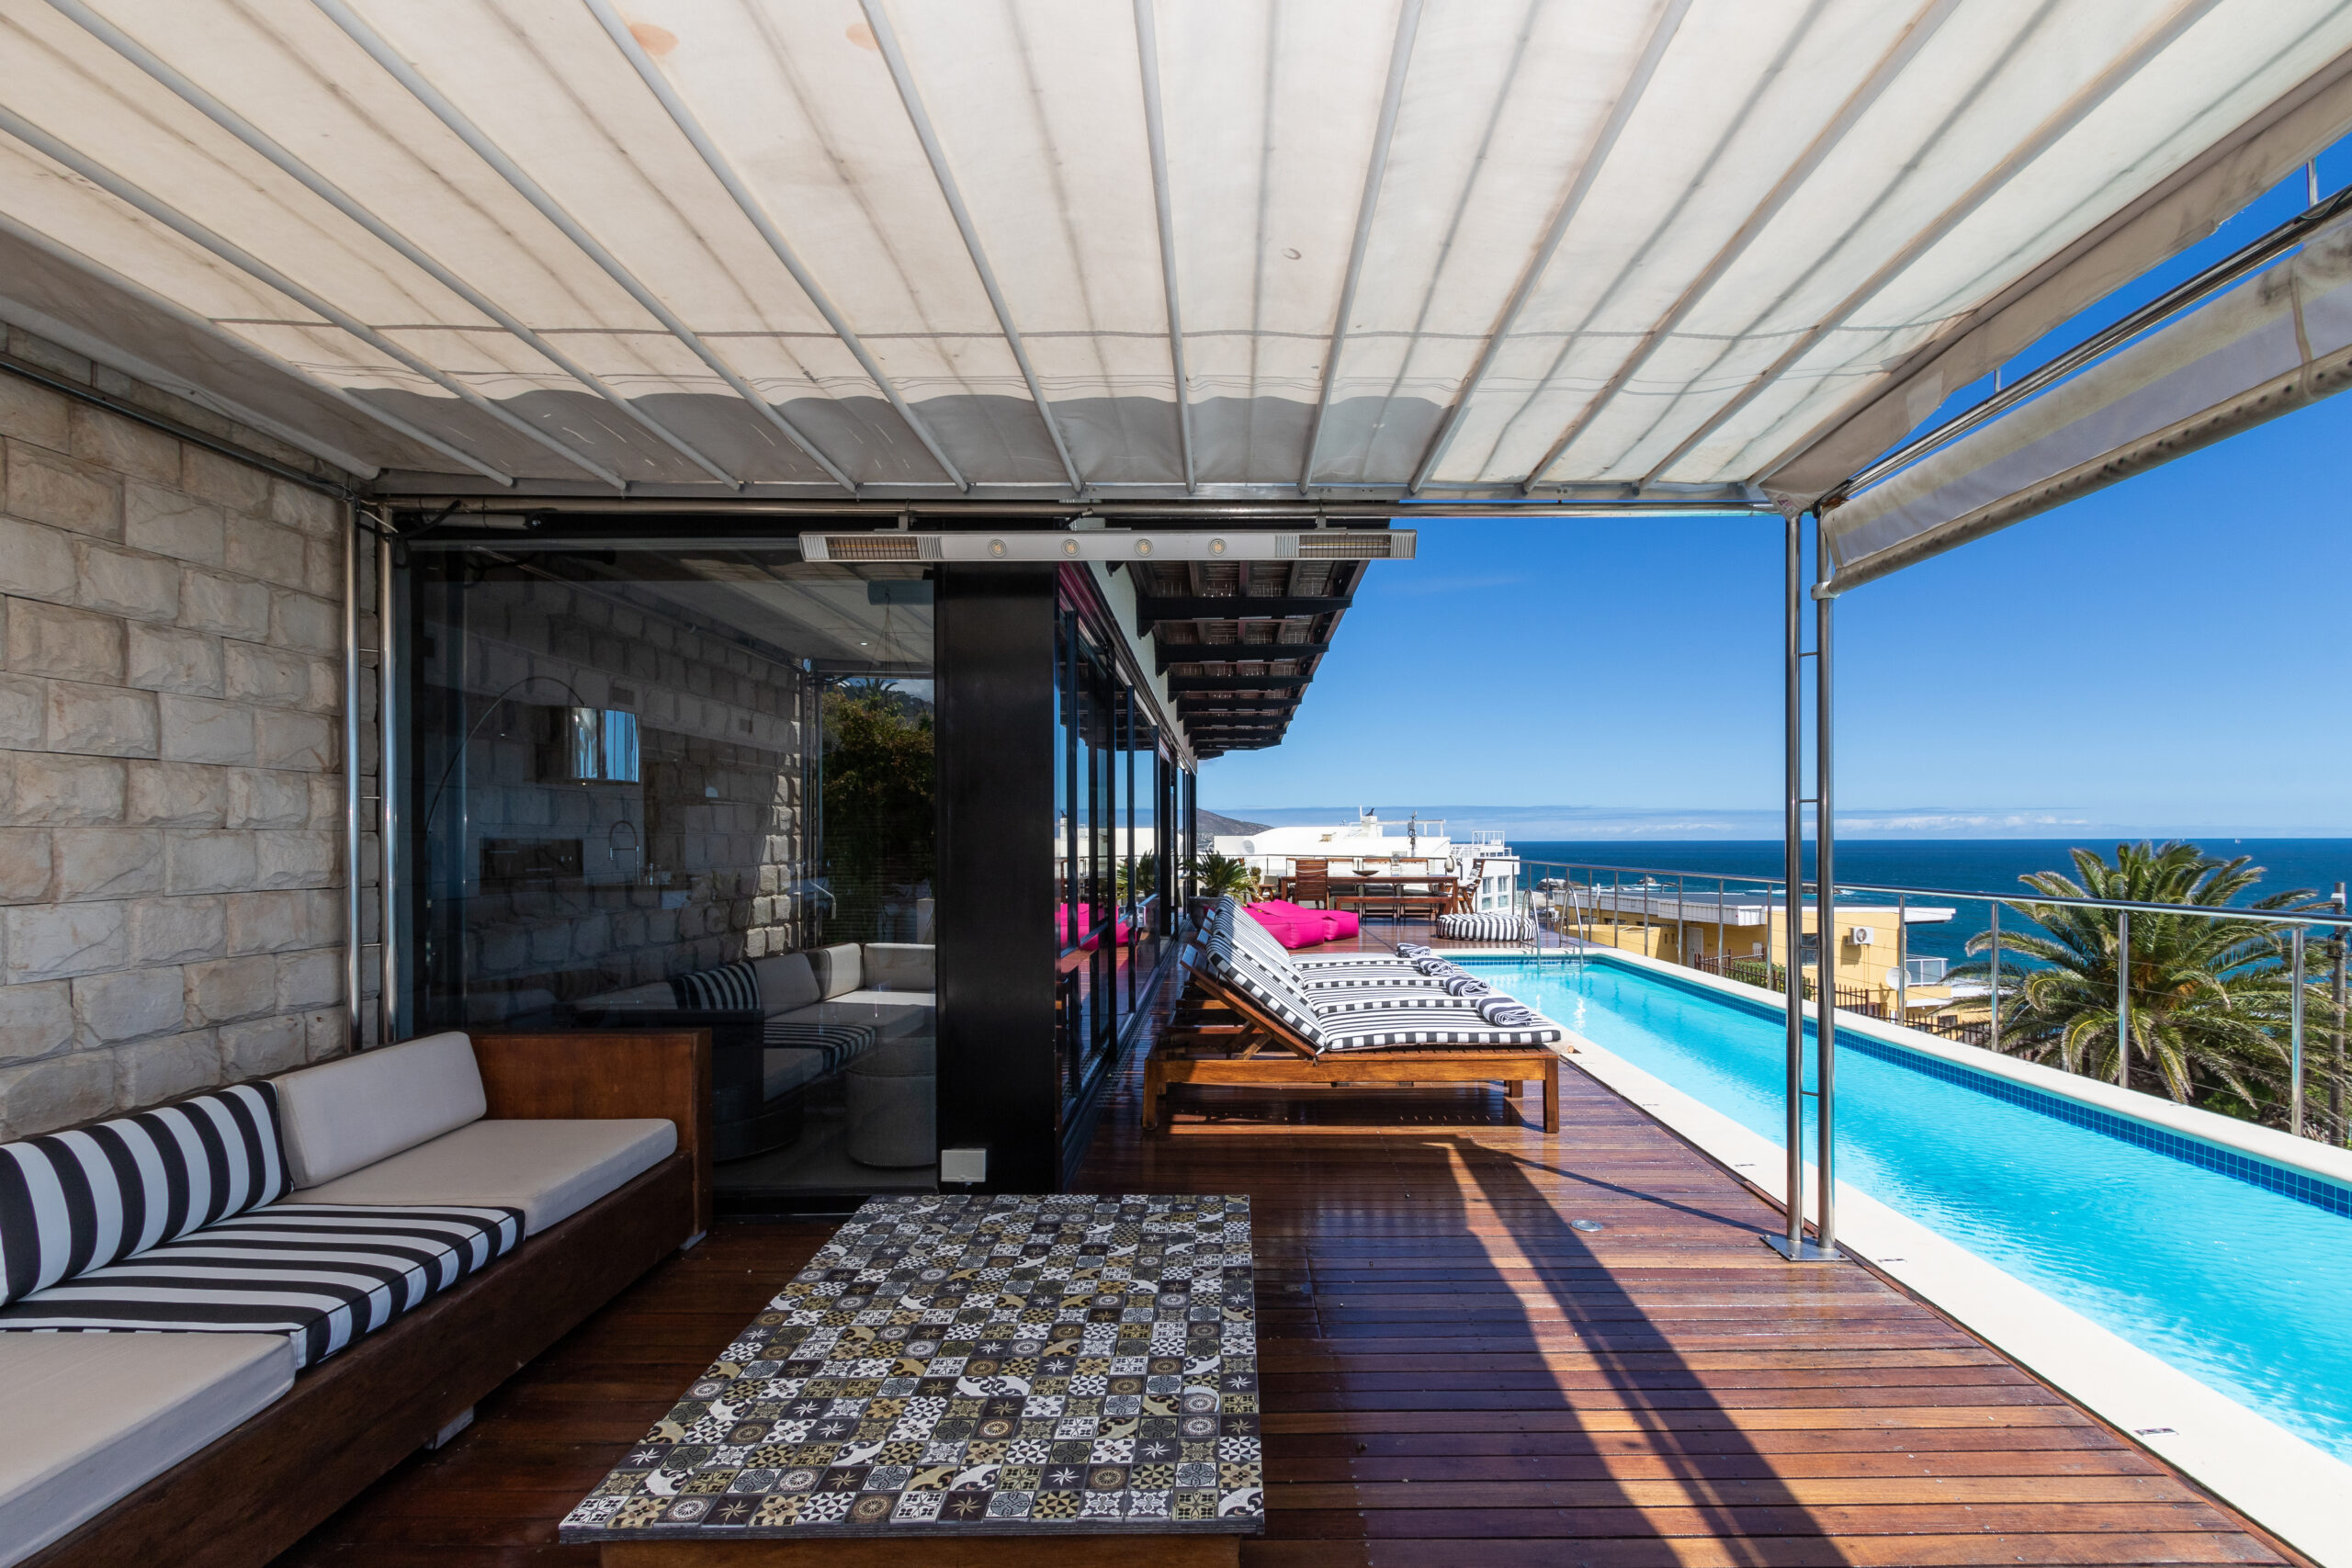 19. Patio Lounge Area Unit 1, A Camps Bay Drive, Camps Bay 27